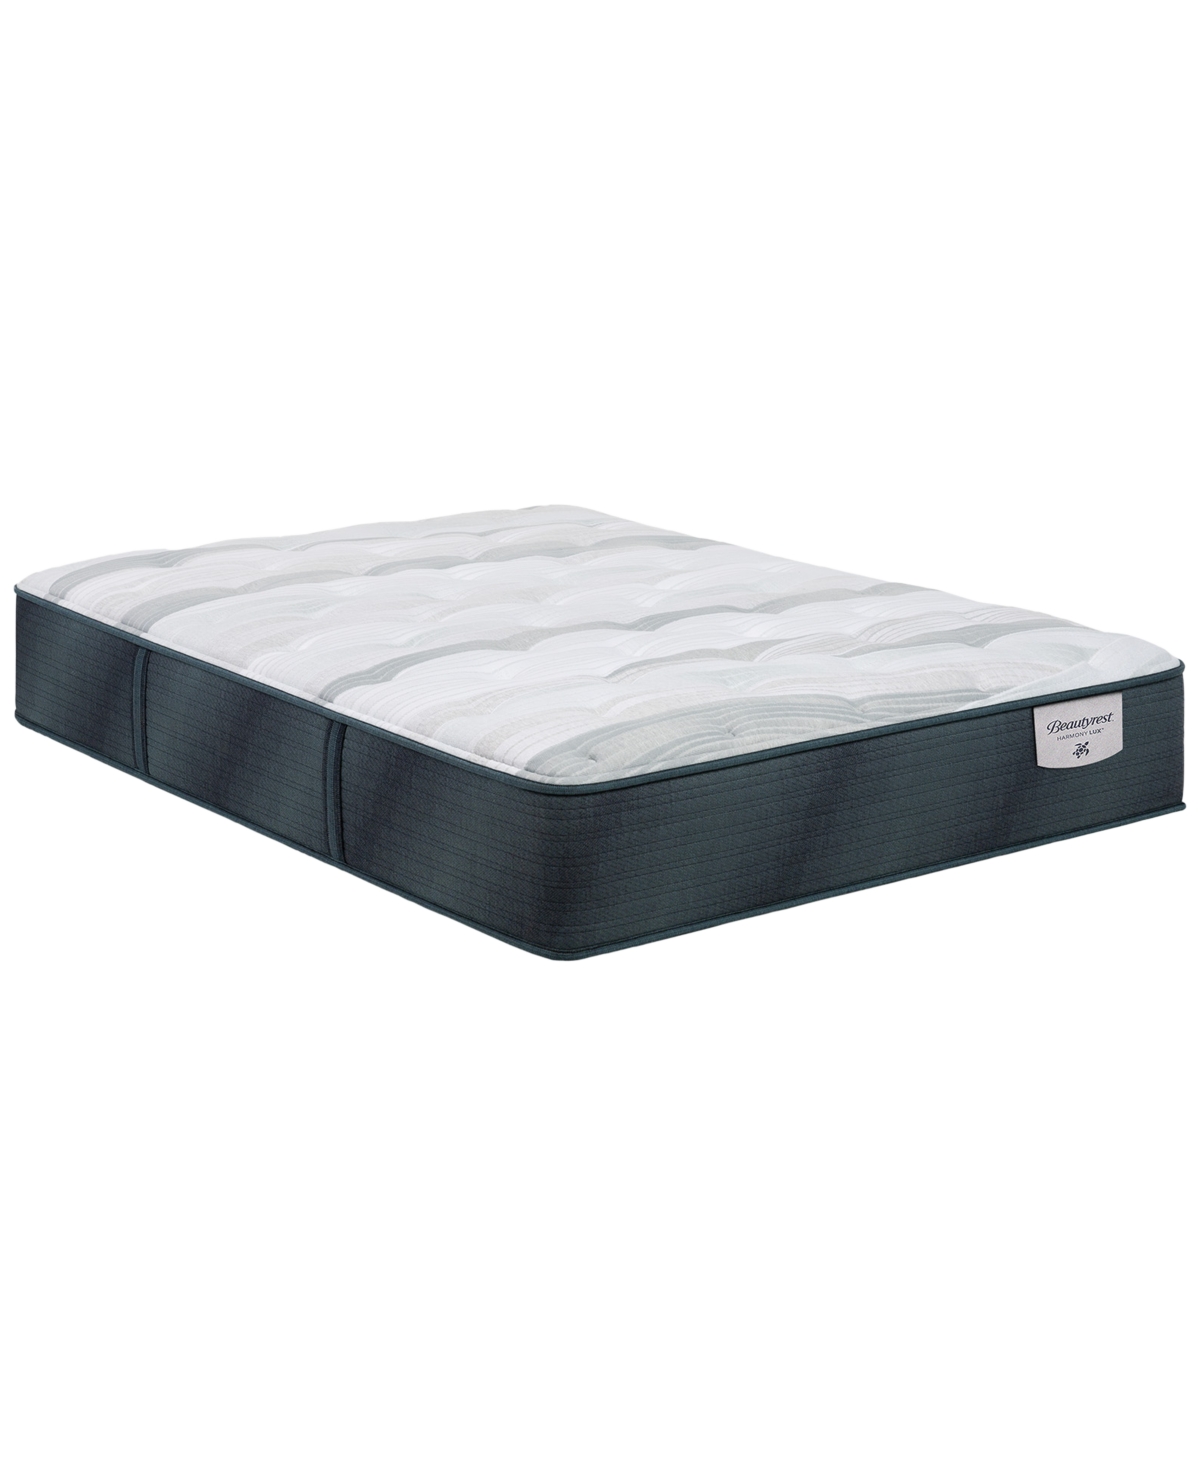 Beautyrest Harmony Lux Anchor Island 13.5" Plush Mattress In No Color